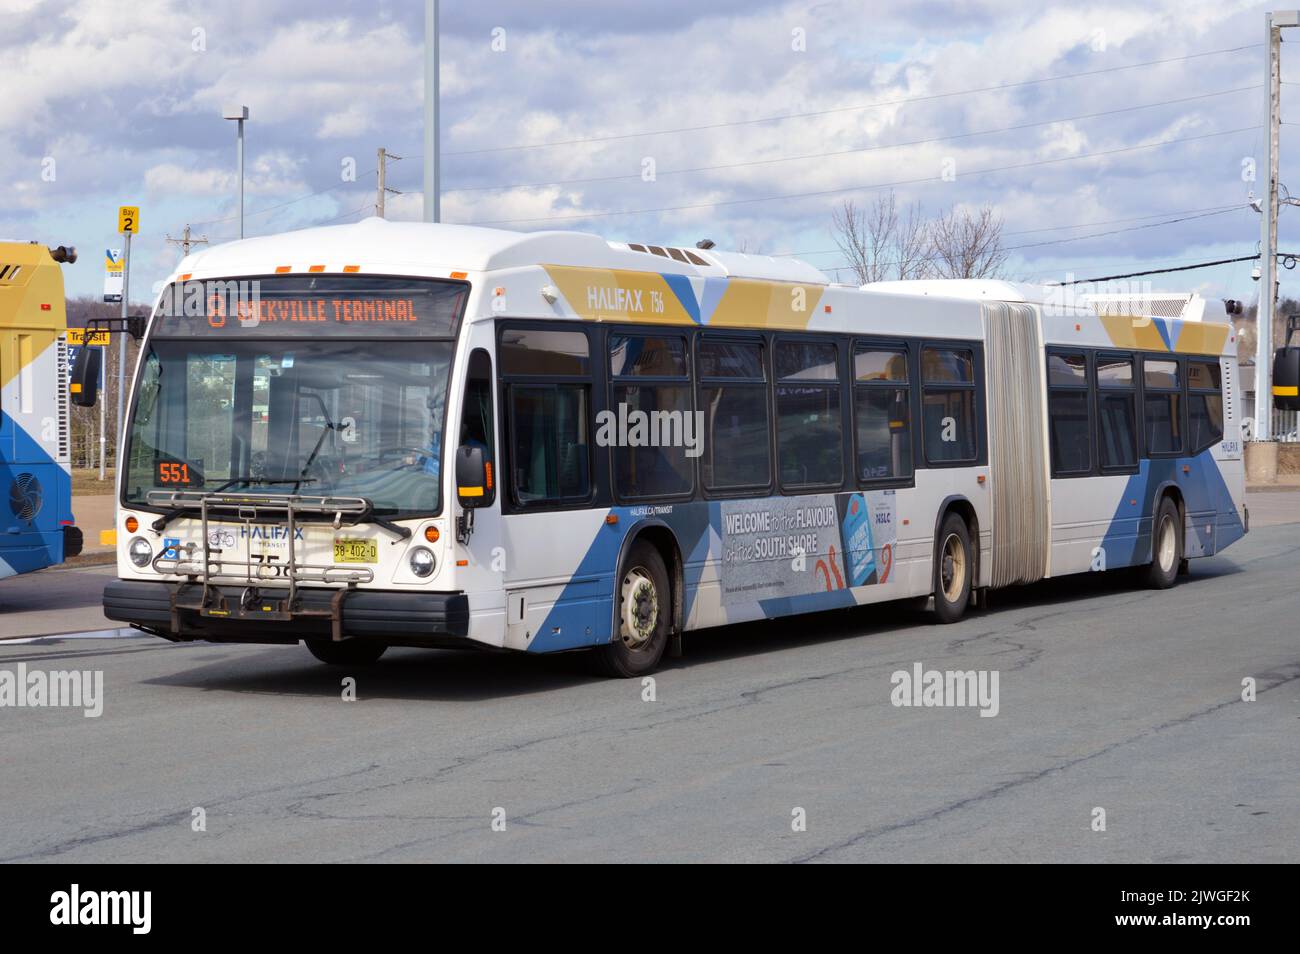 Articulated bus (Novabus LFS Artic) at Sackville Terminal of the Halifax Transit system in Halifax, Nova Scotia, Canada Stock Photo